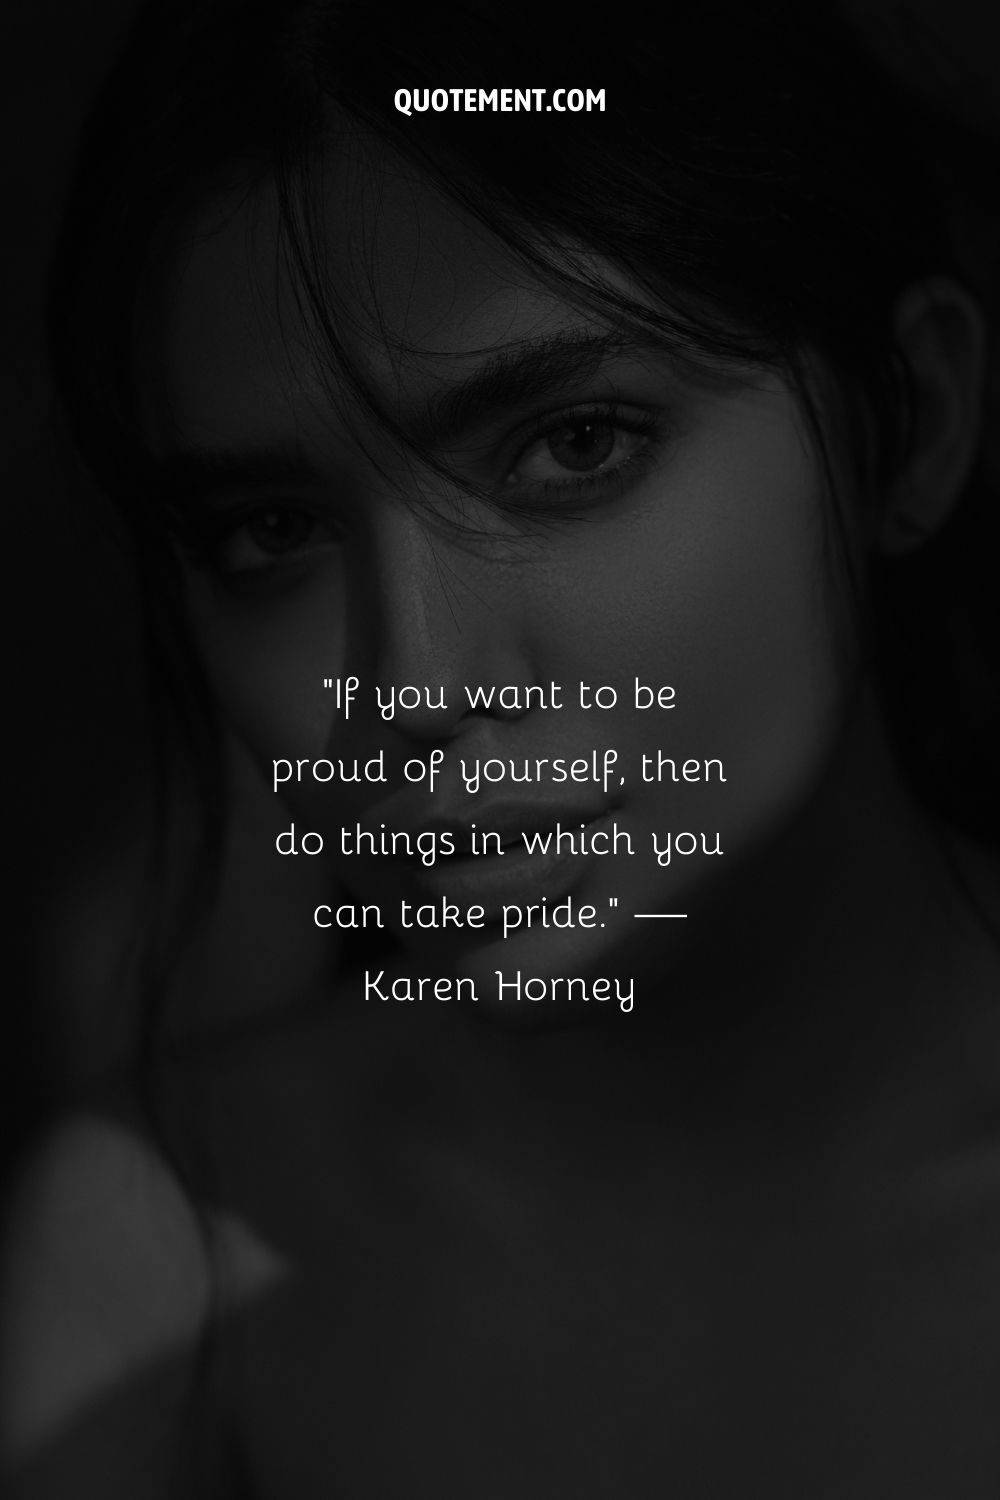 A dark image of a woman's face representing an inspiring pride quote
